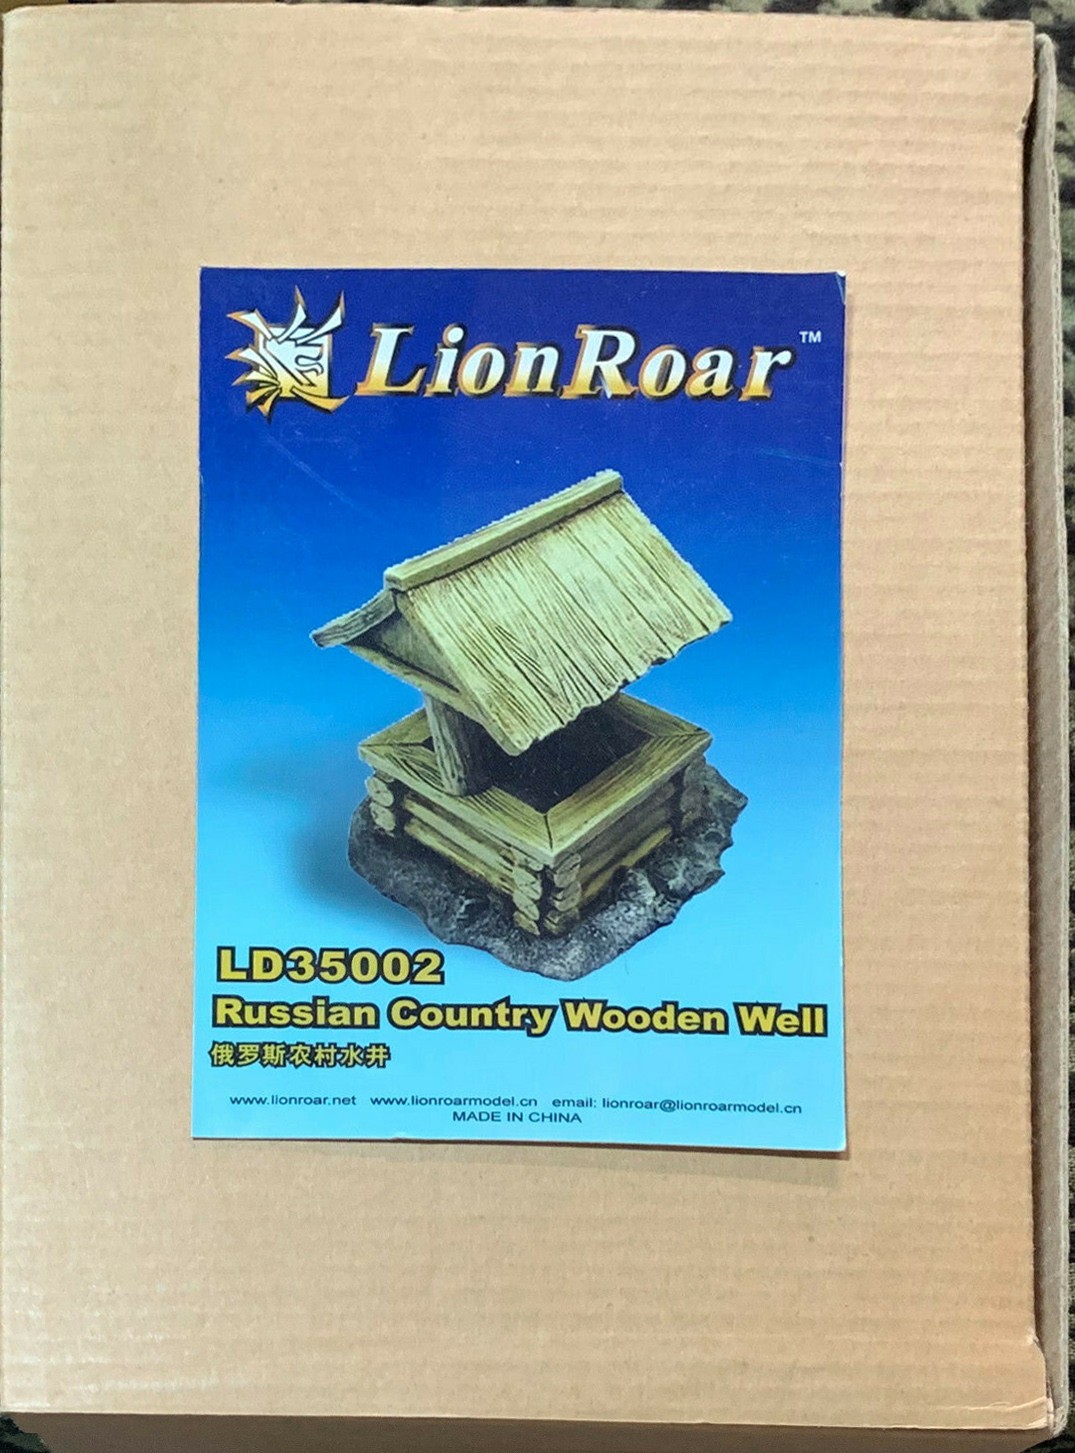 LD35002 Russian Country Wooden Well Image